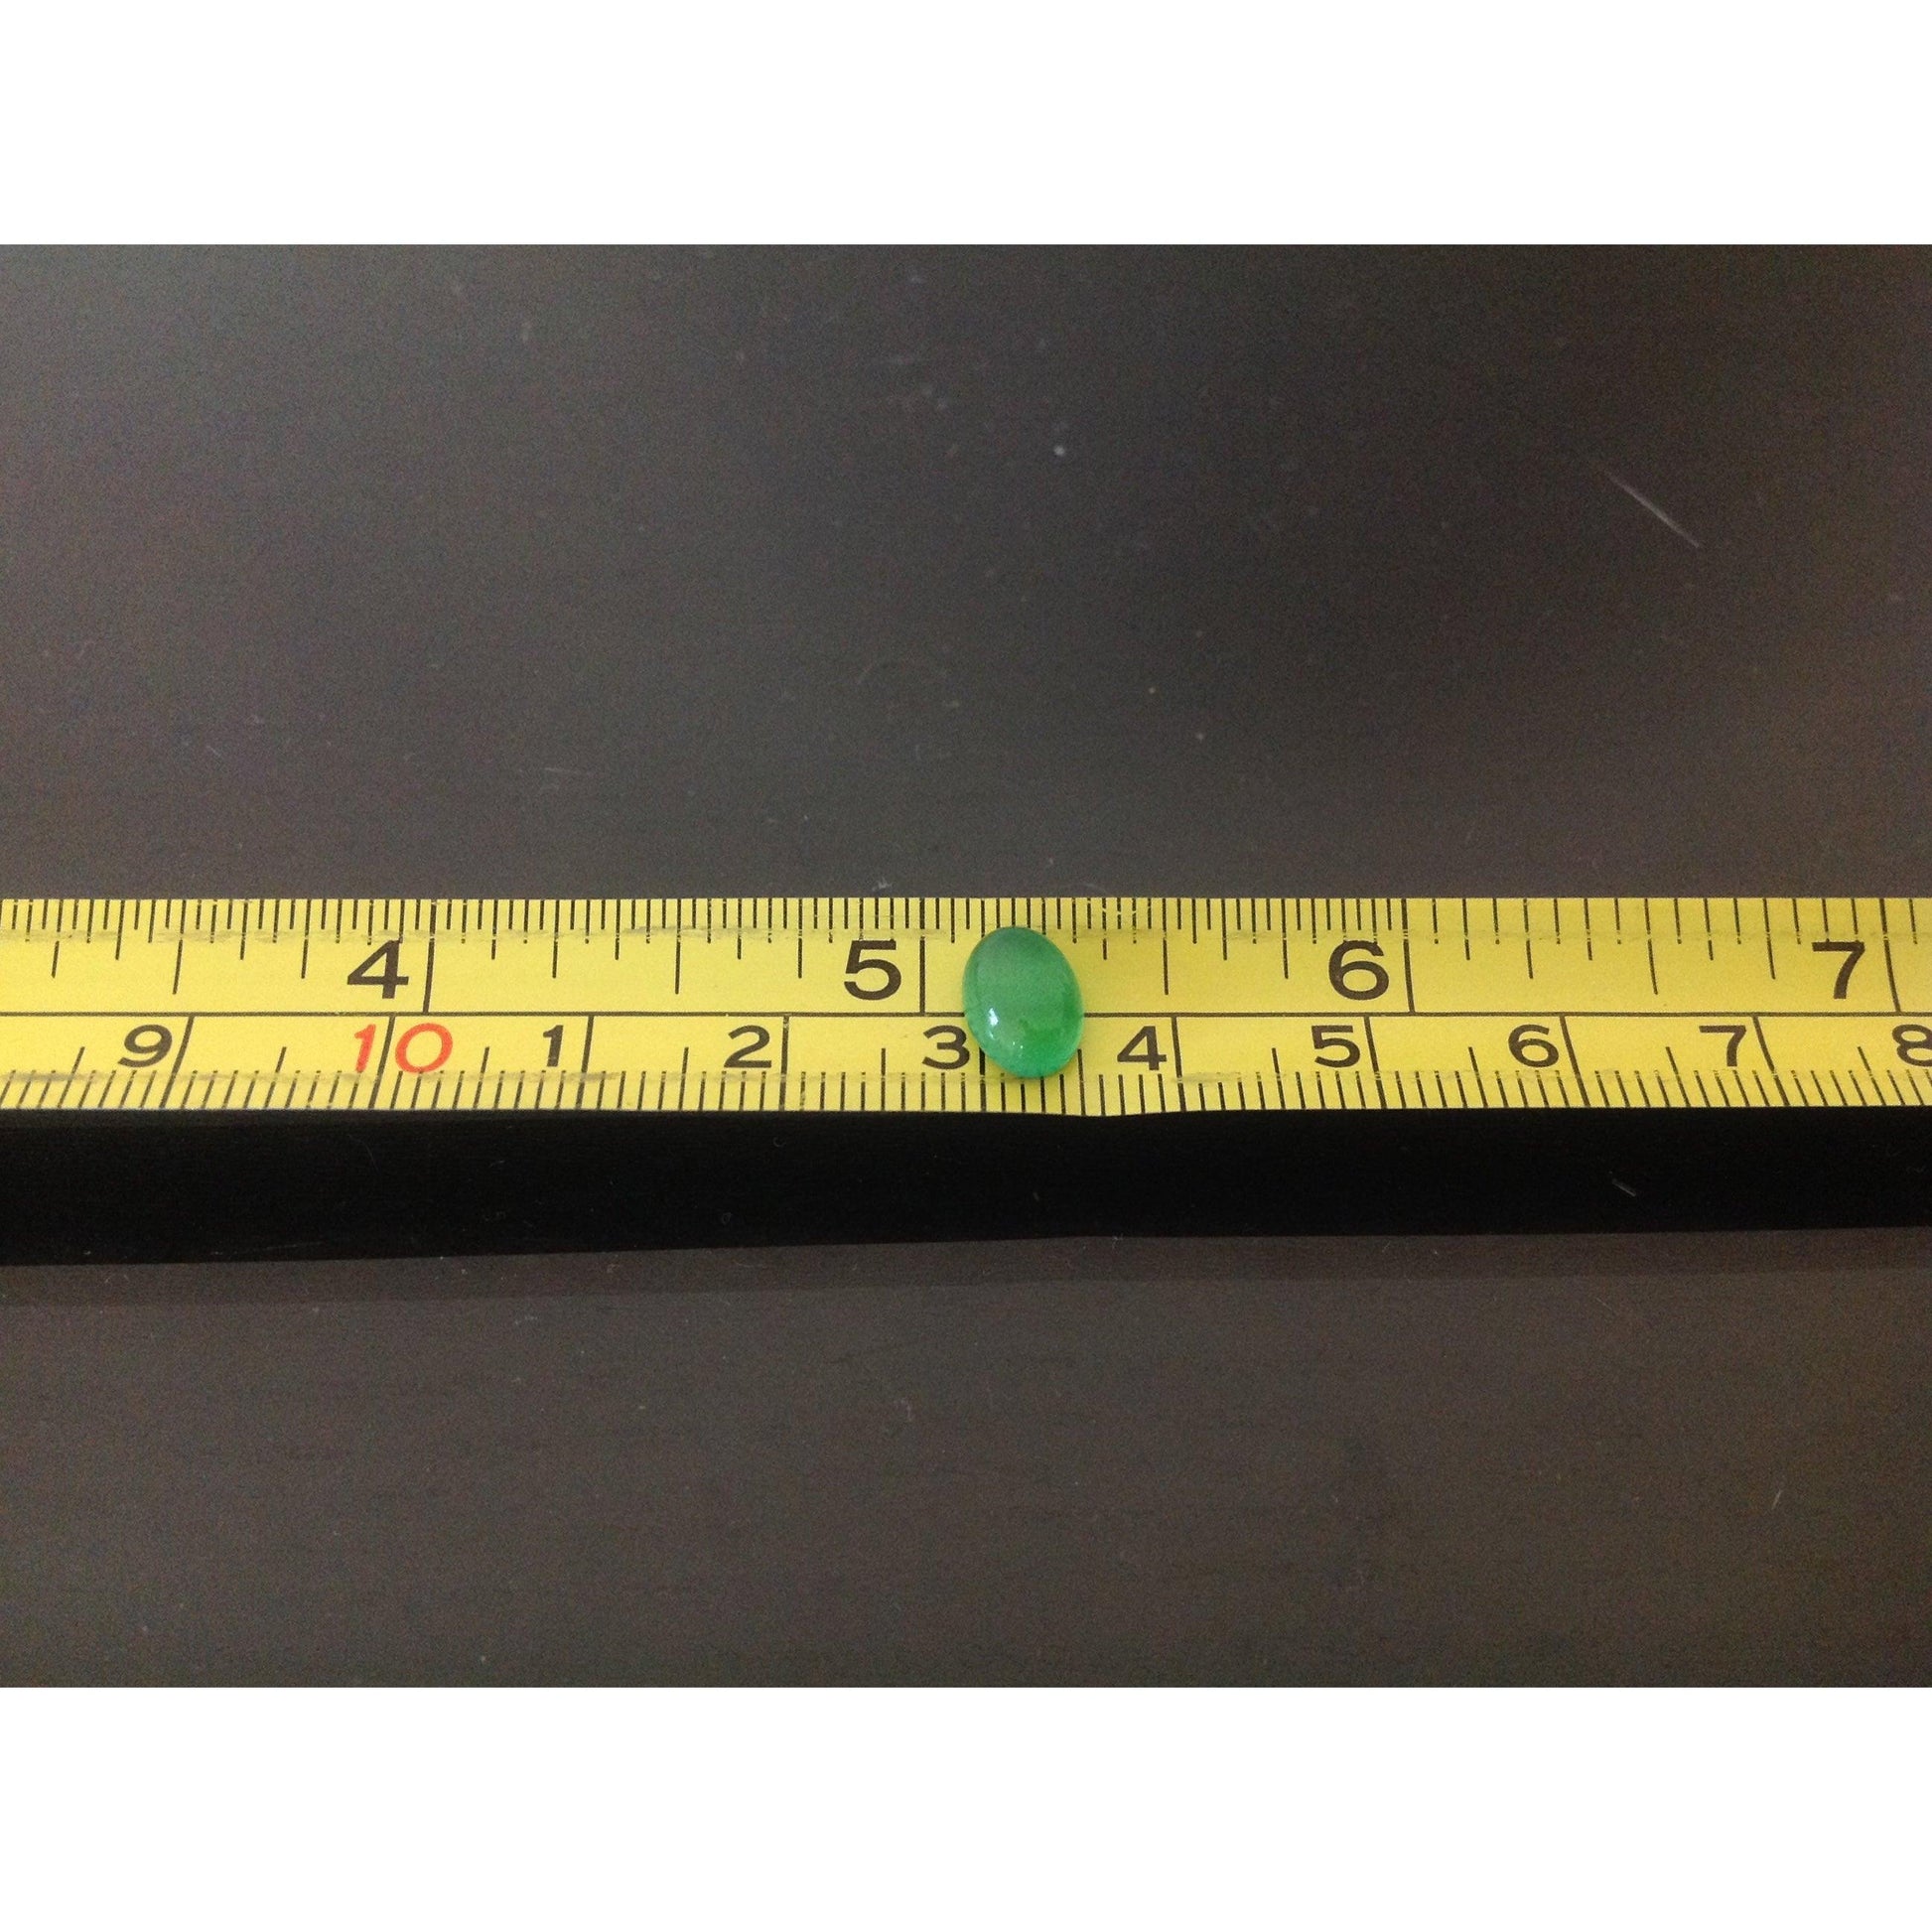 stone size on measuring tape 